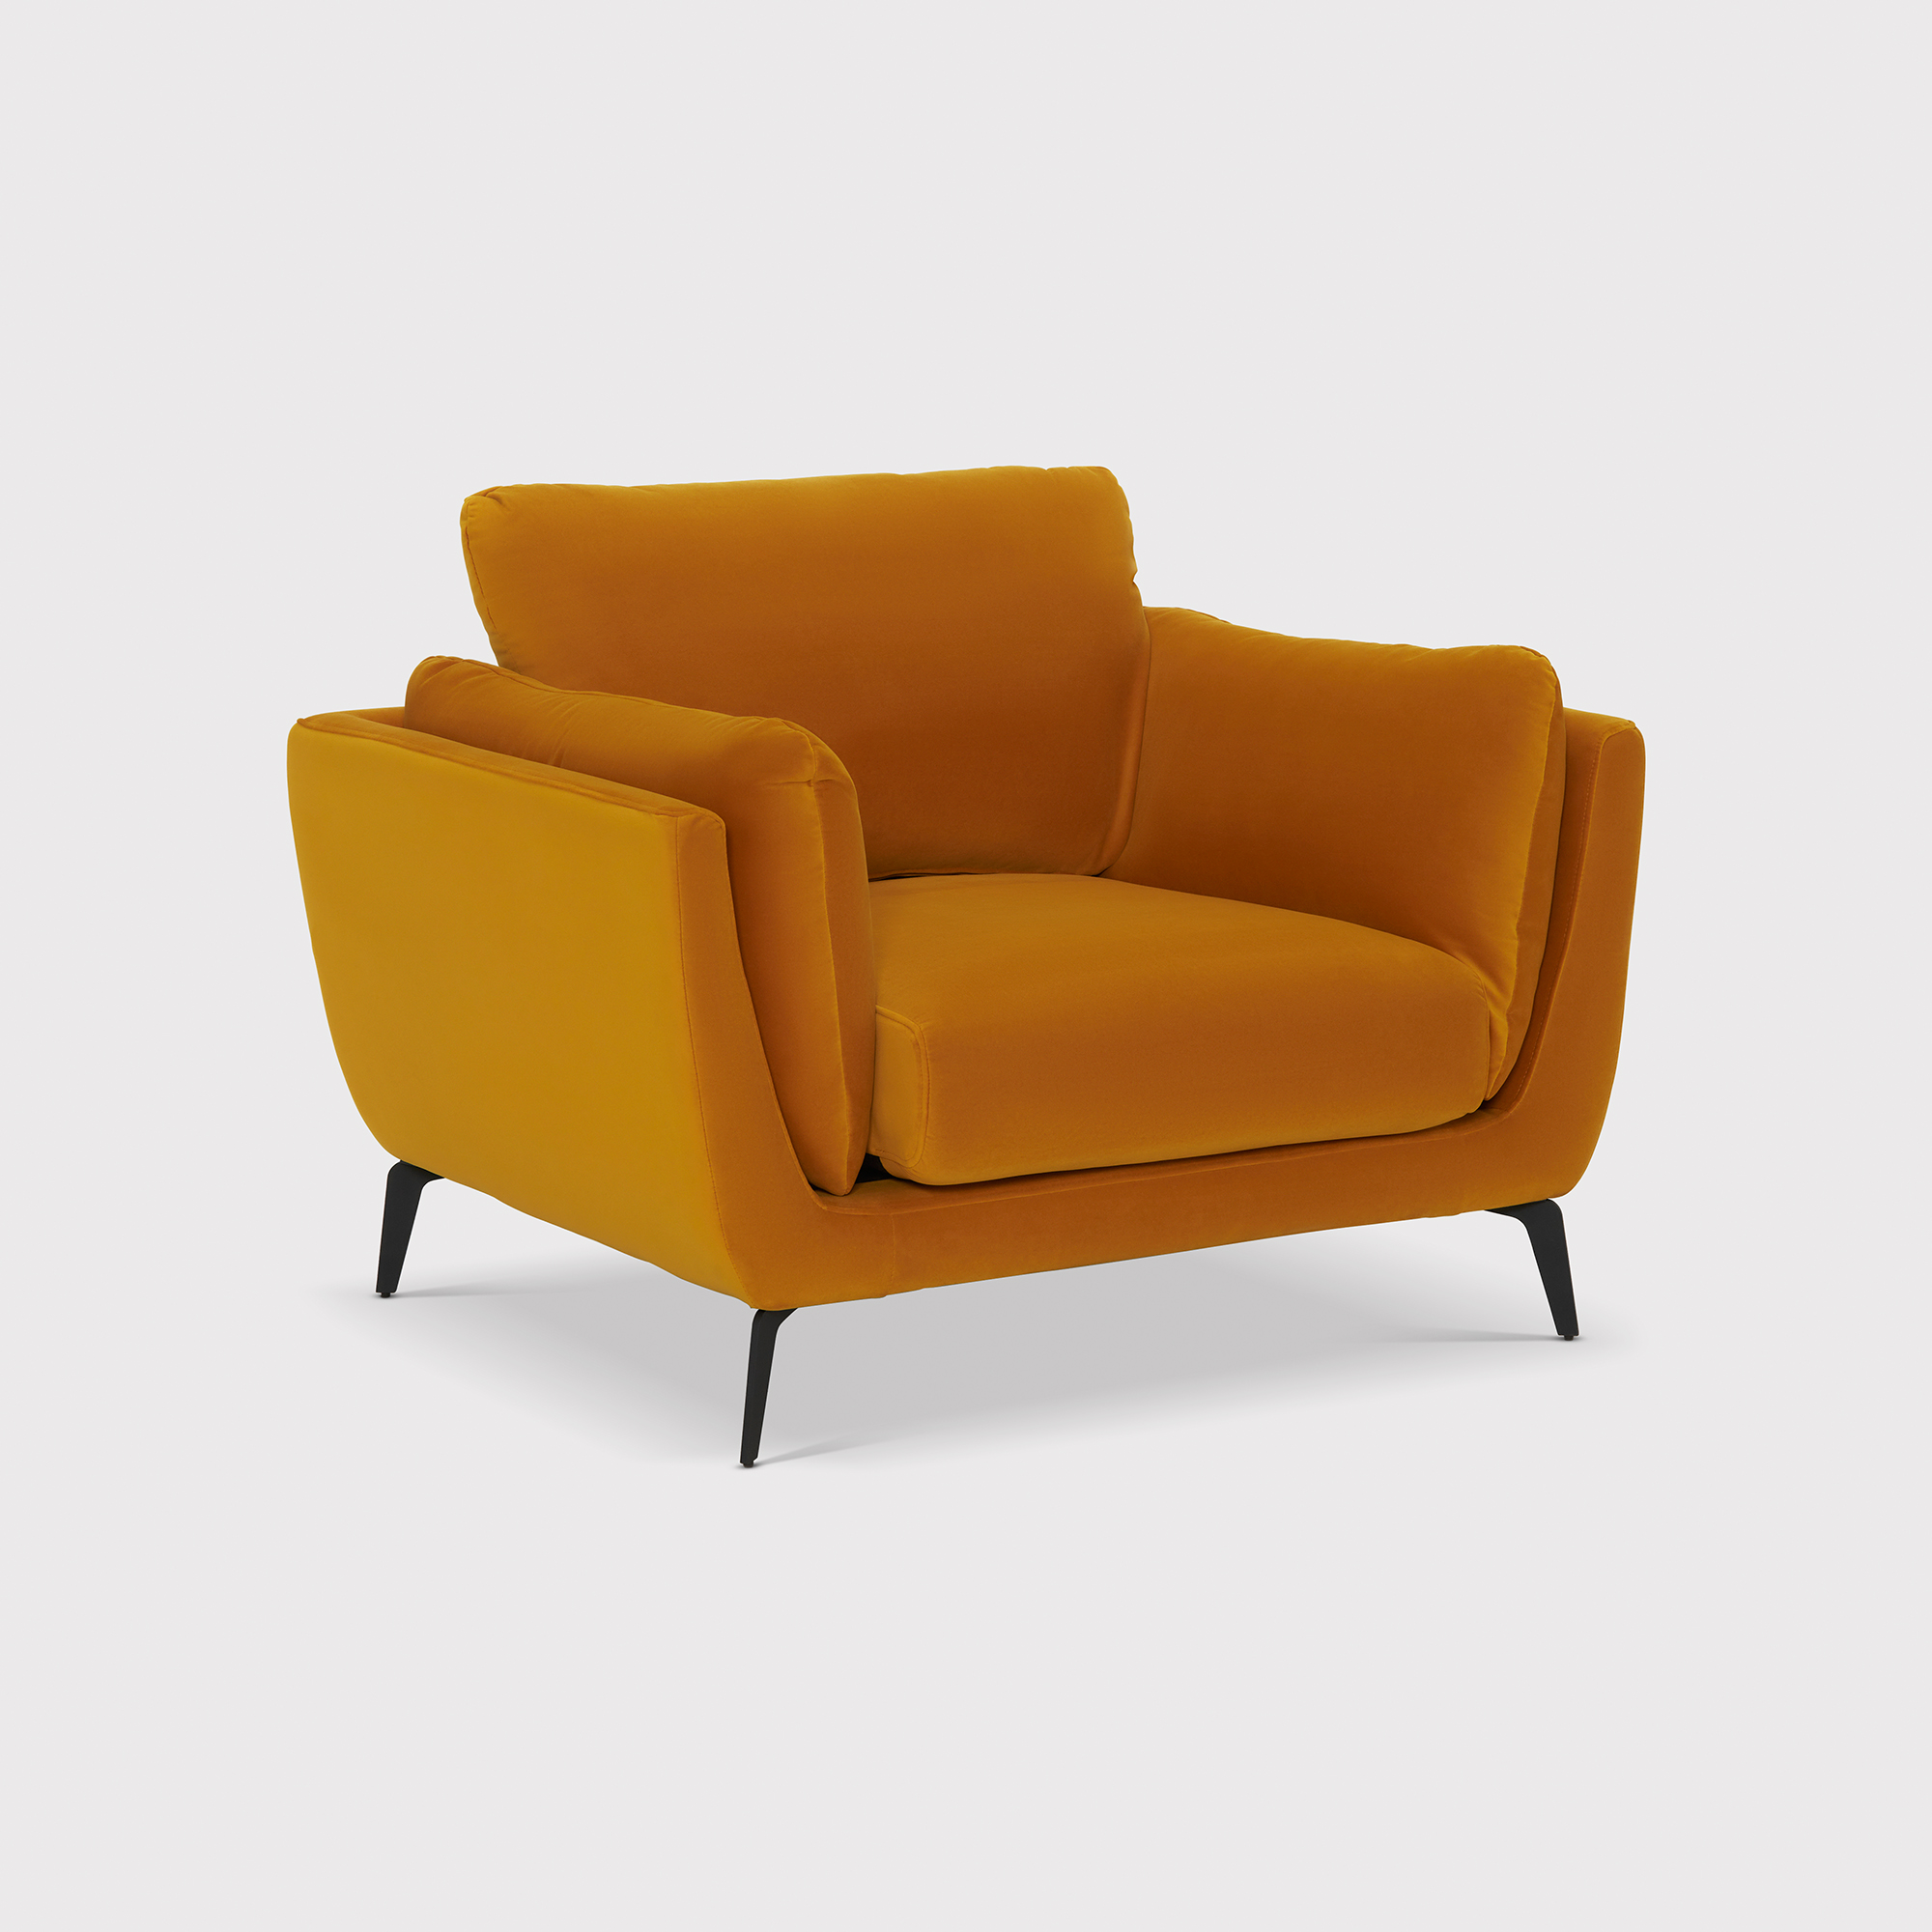 Photo of Boone armchair in yellow fabric